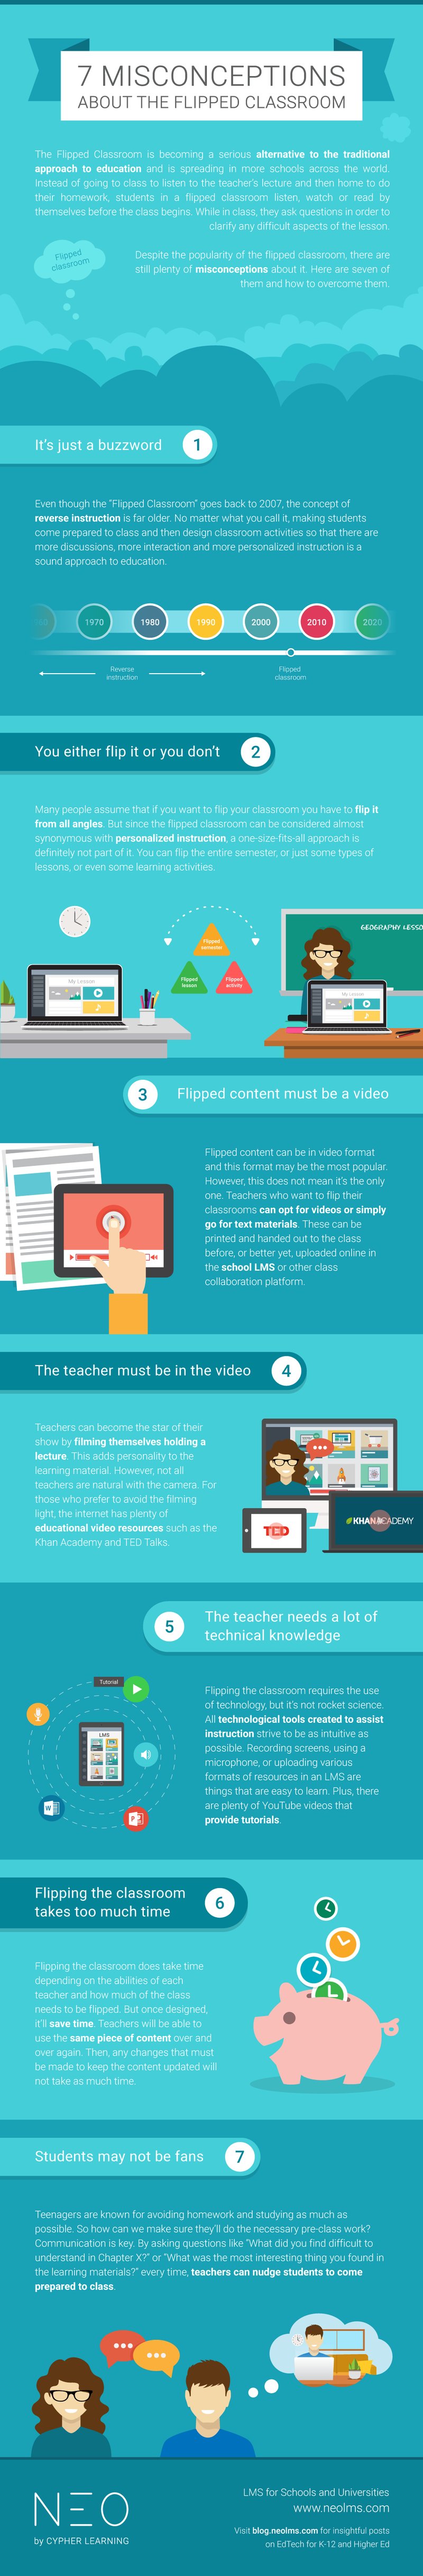 Misconceptions about the flipped classroom Infographic